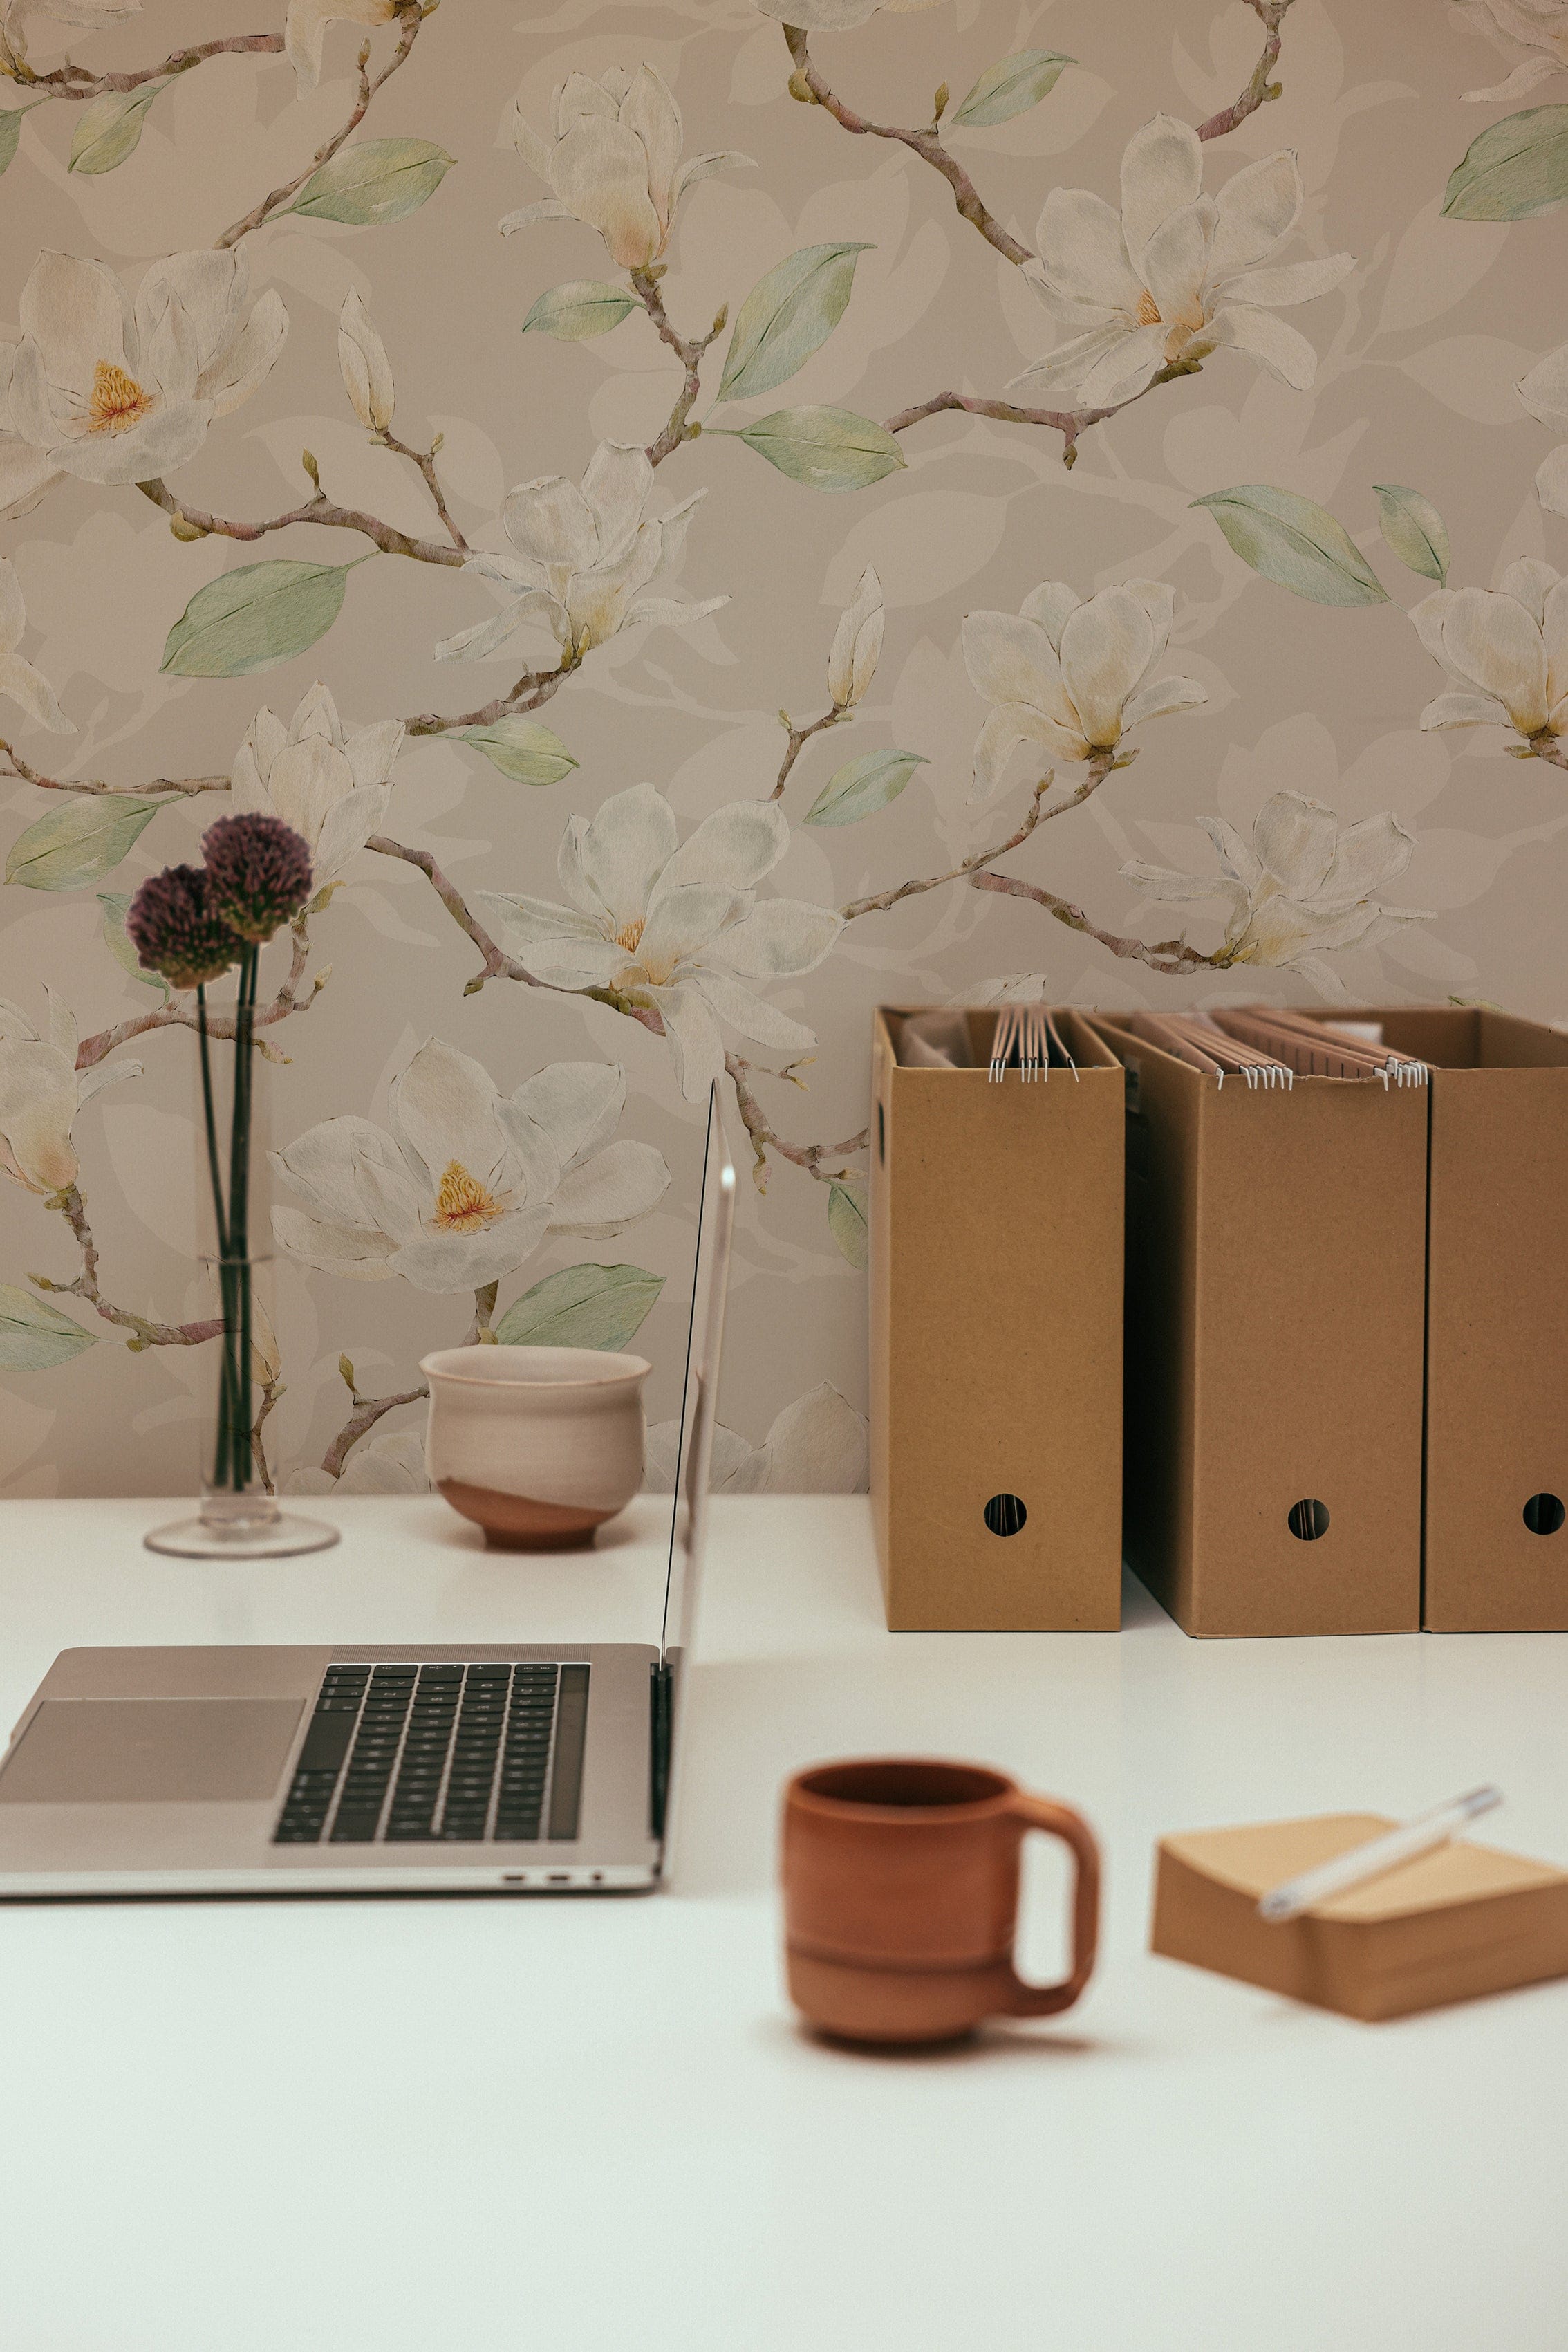 A detailed workspace setting showing a laptop on a wooden desk against a backdrop of soft beige wallpaper adorned with delicate watercolor magnolia flowers, creating a peaceful working environment.